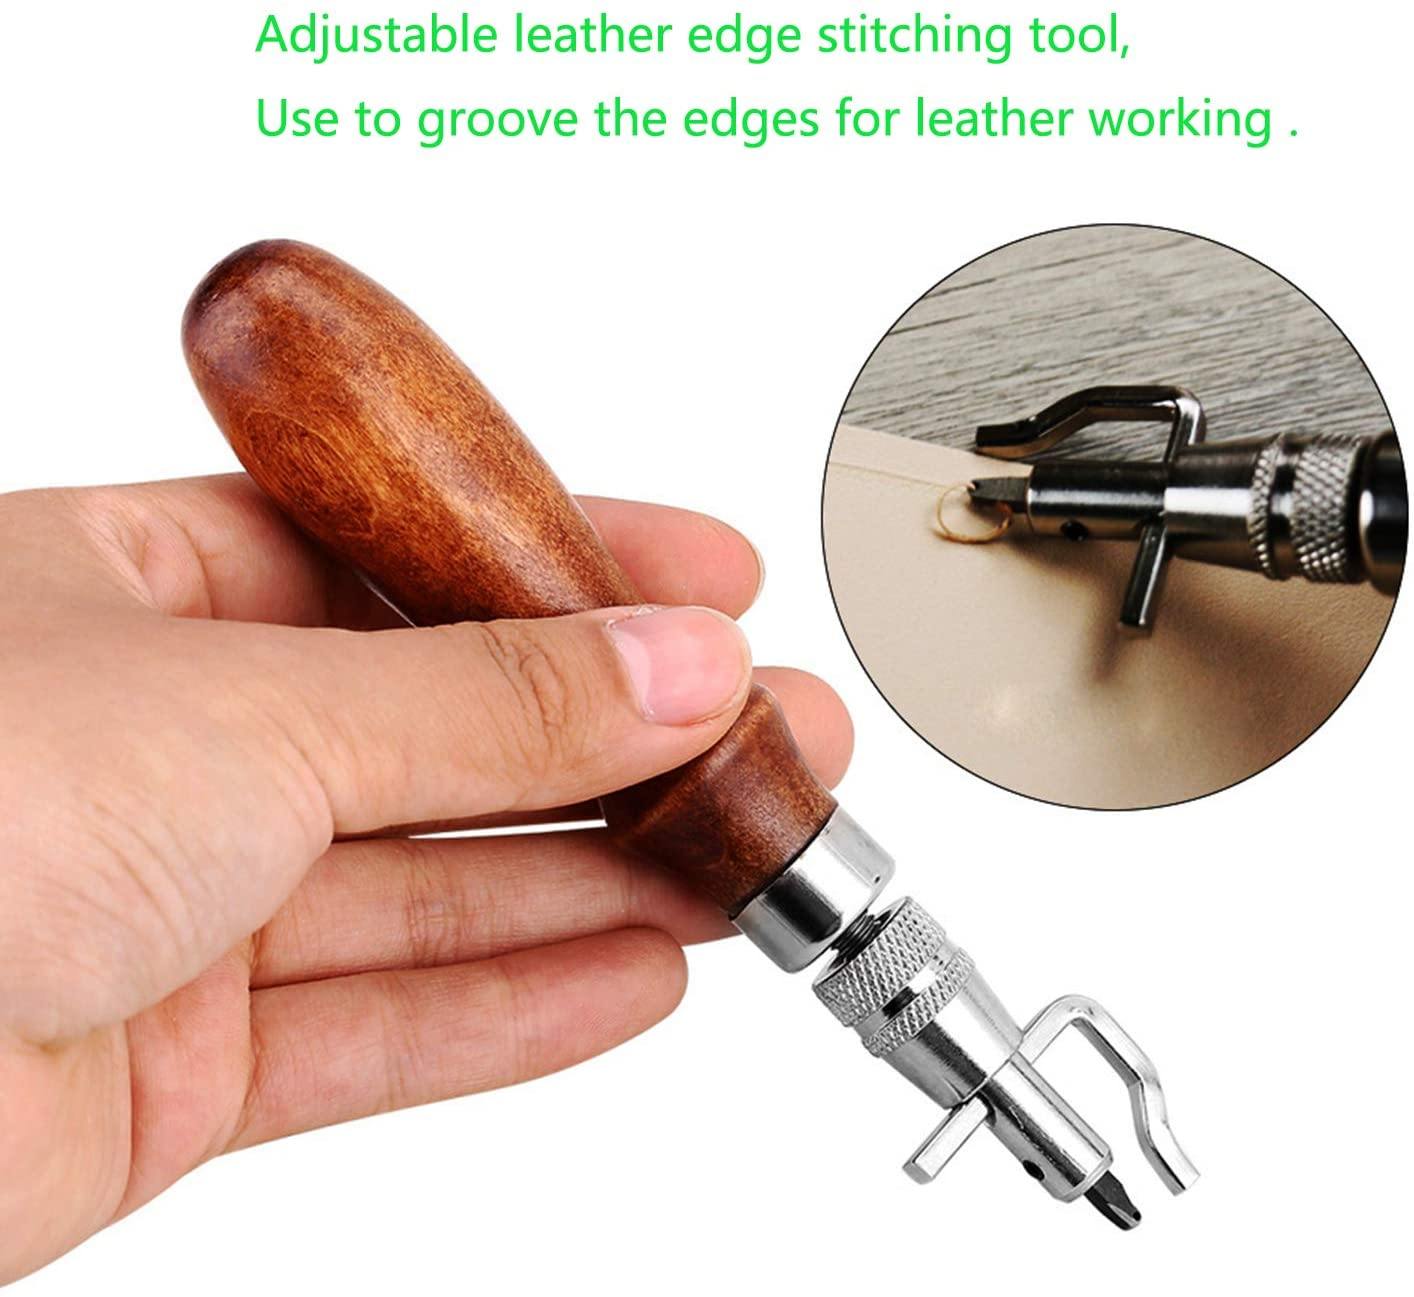 Leather Groover Tool,Knoweasy 7 in 1 Pro Stitching Groover and Creasing  Edge Beveler for Leather Edge Stitching Tool